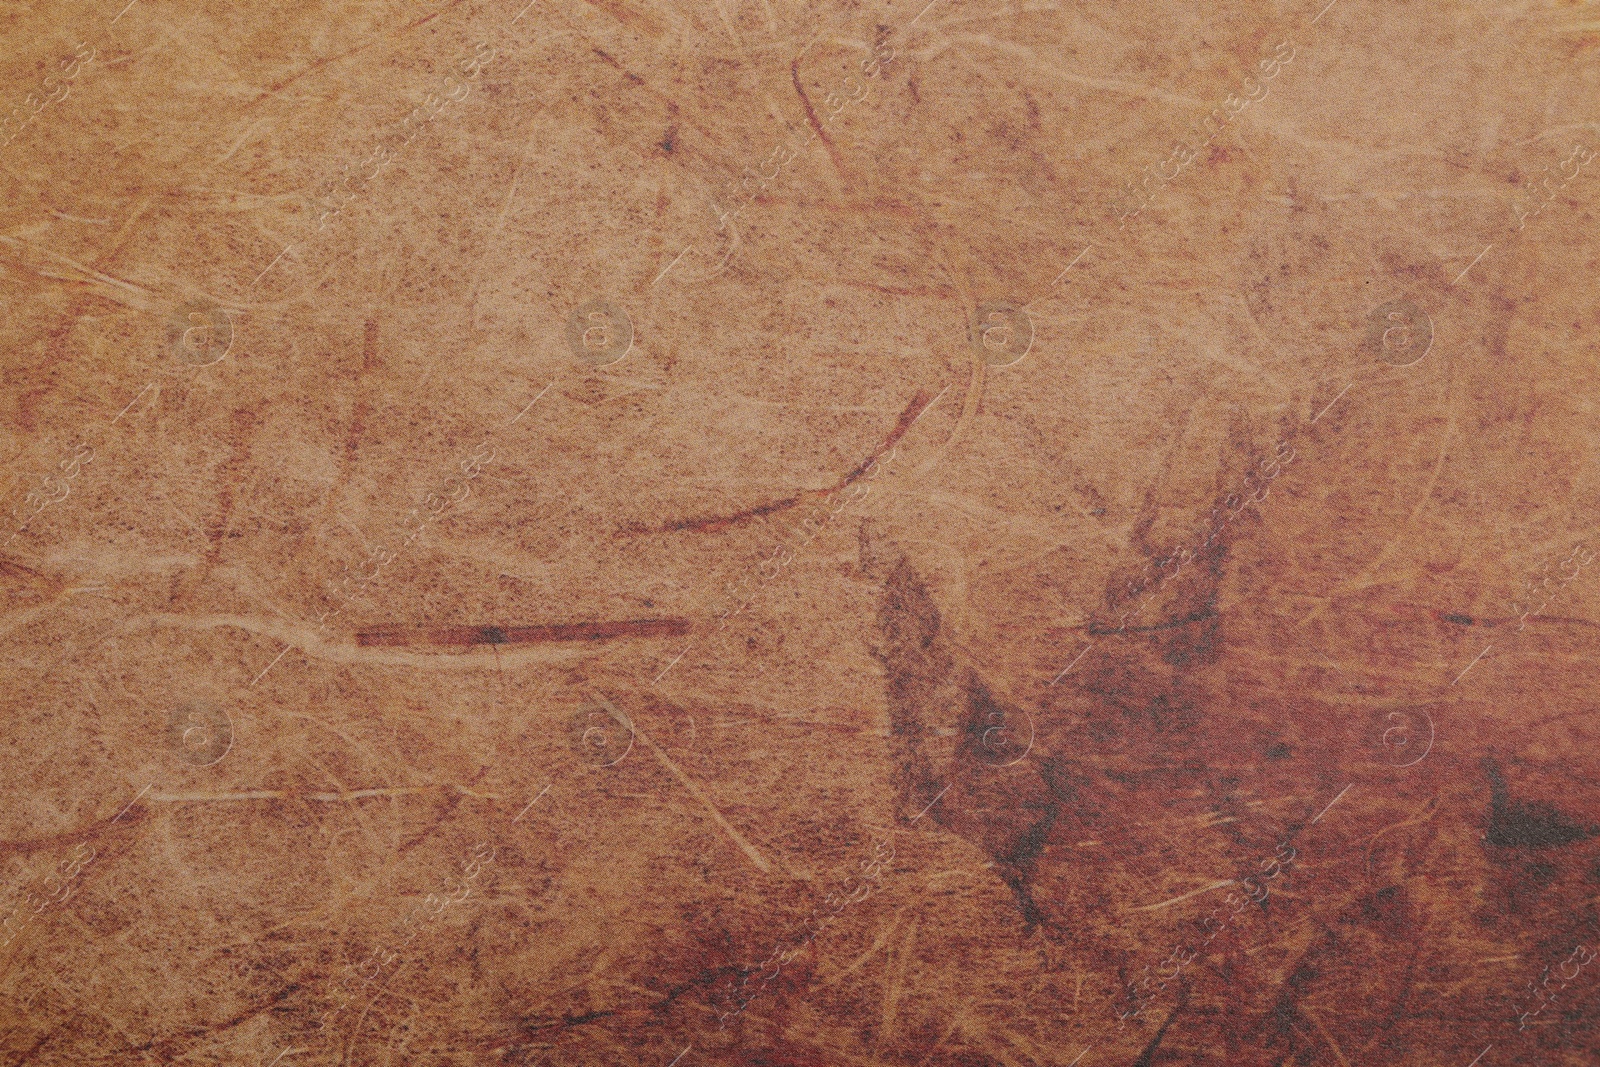 Photo of Texture of parchment paper as background, closeup